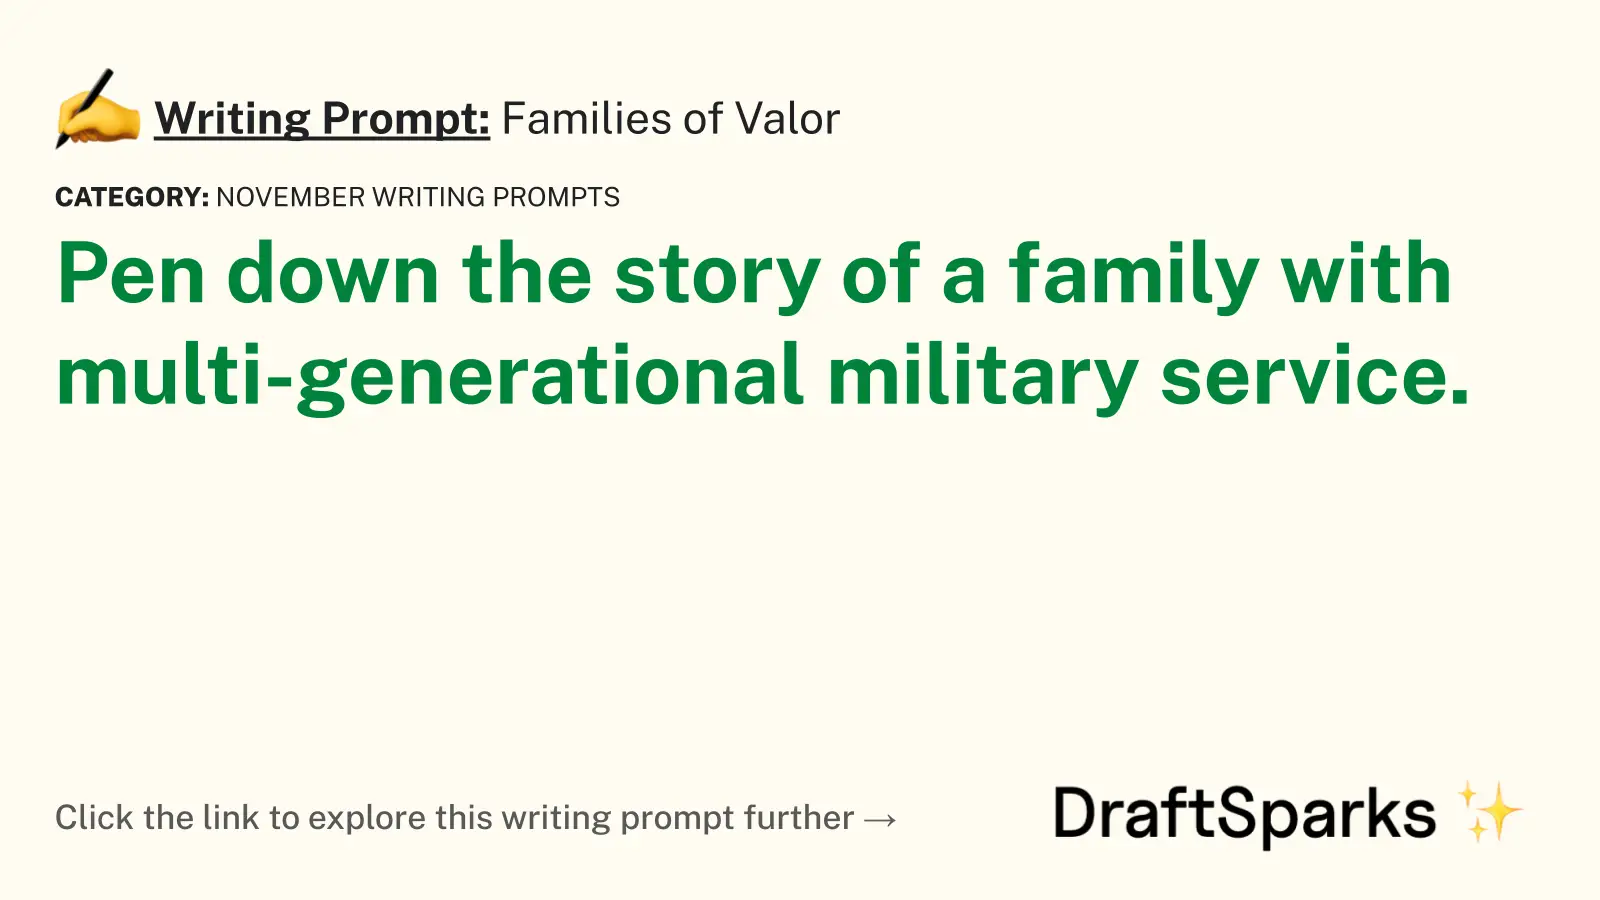 Families of Valor